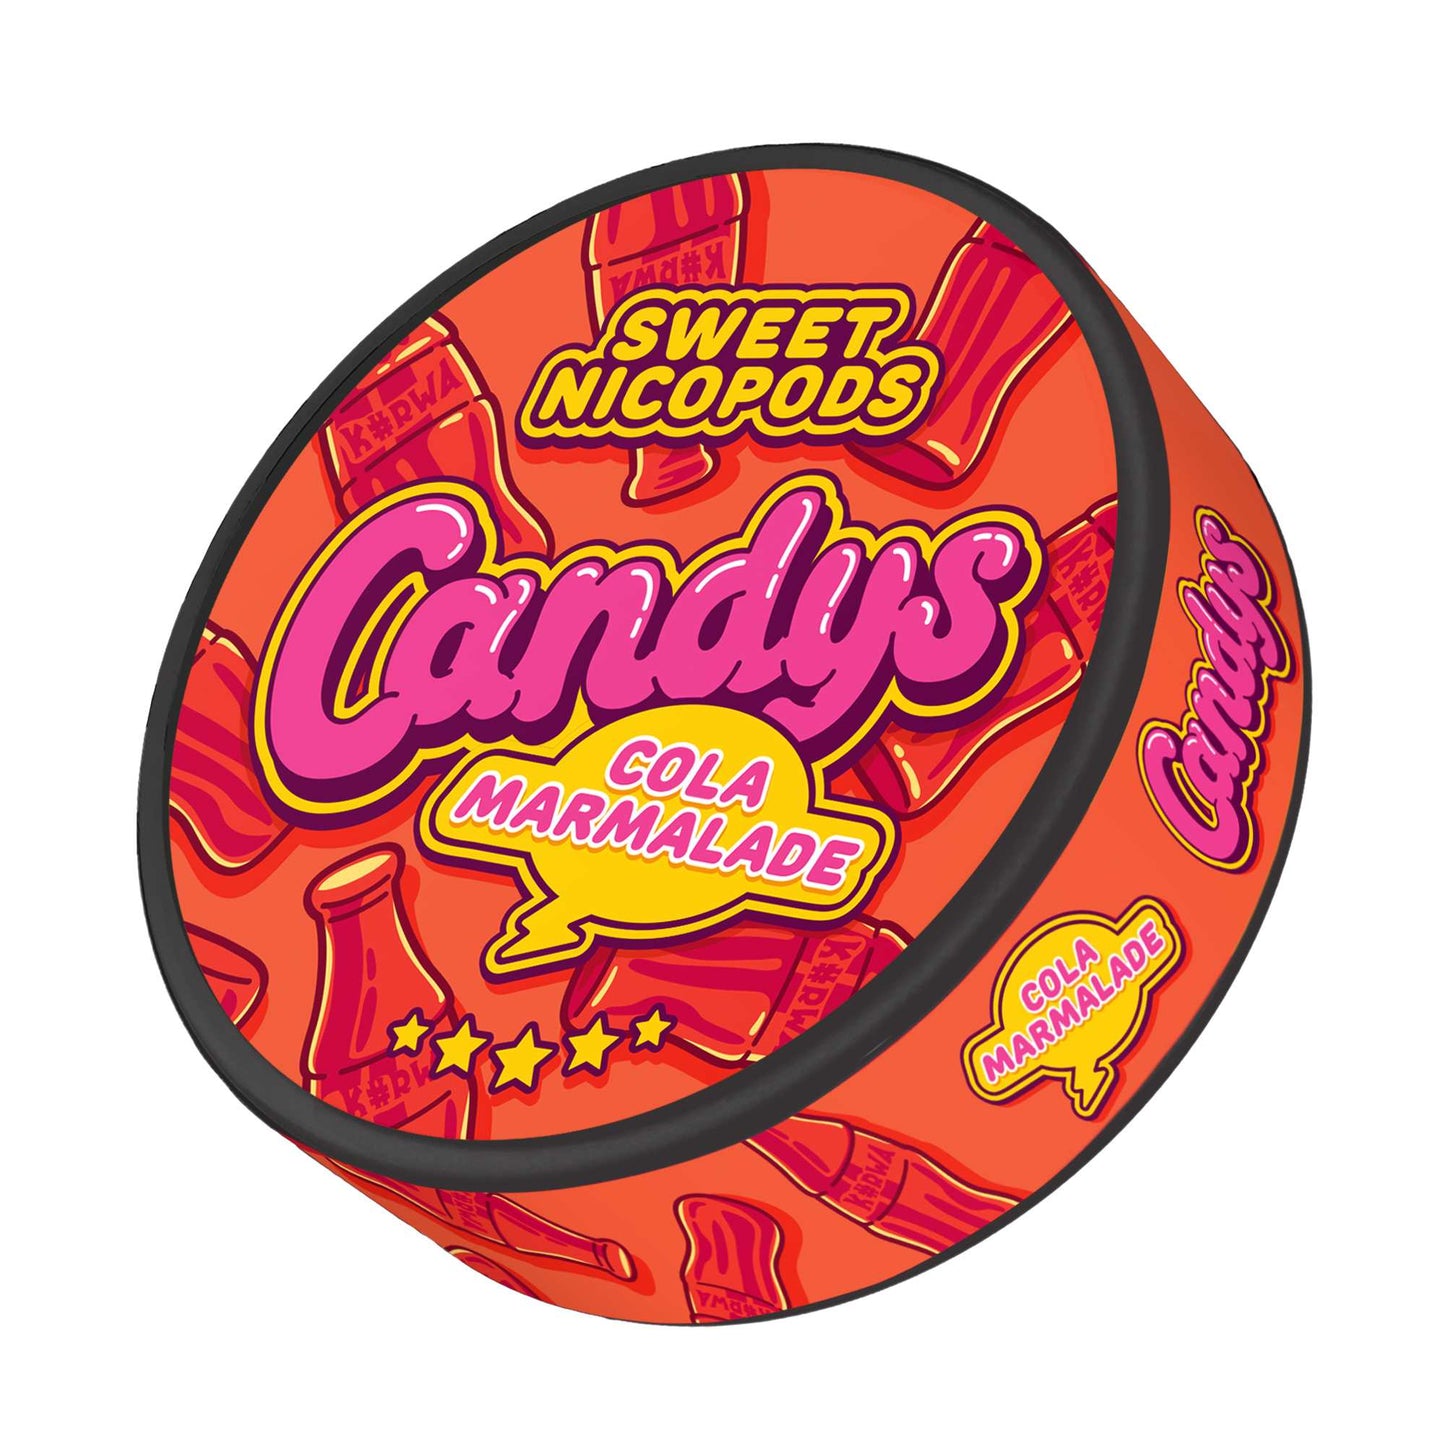 Candy’s Cola marmalade Nicotine Pouches, Snus 46.9mg/g